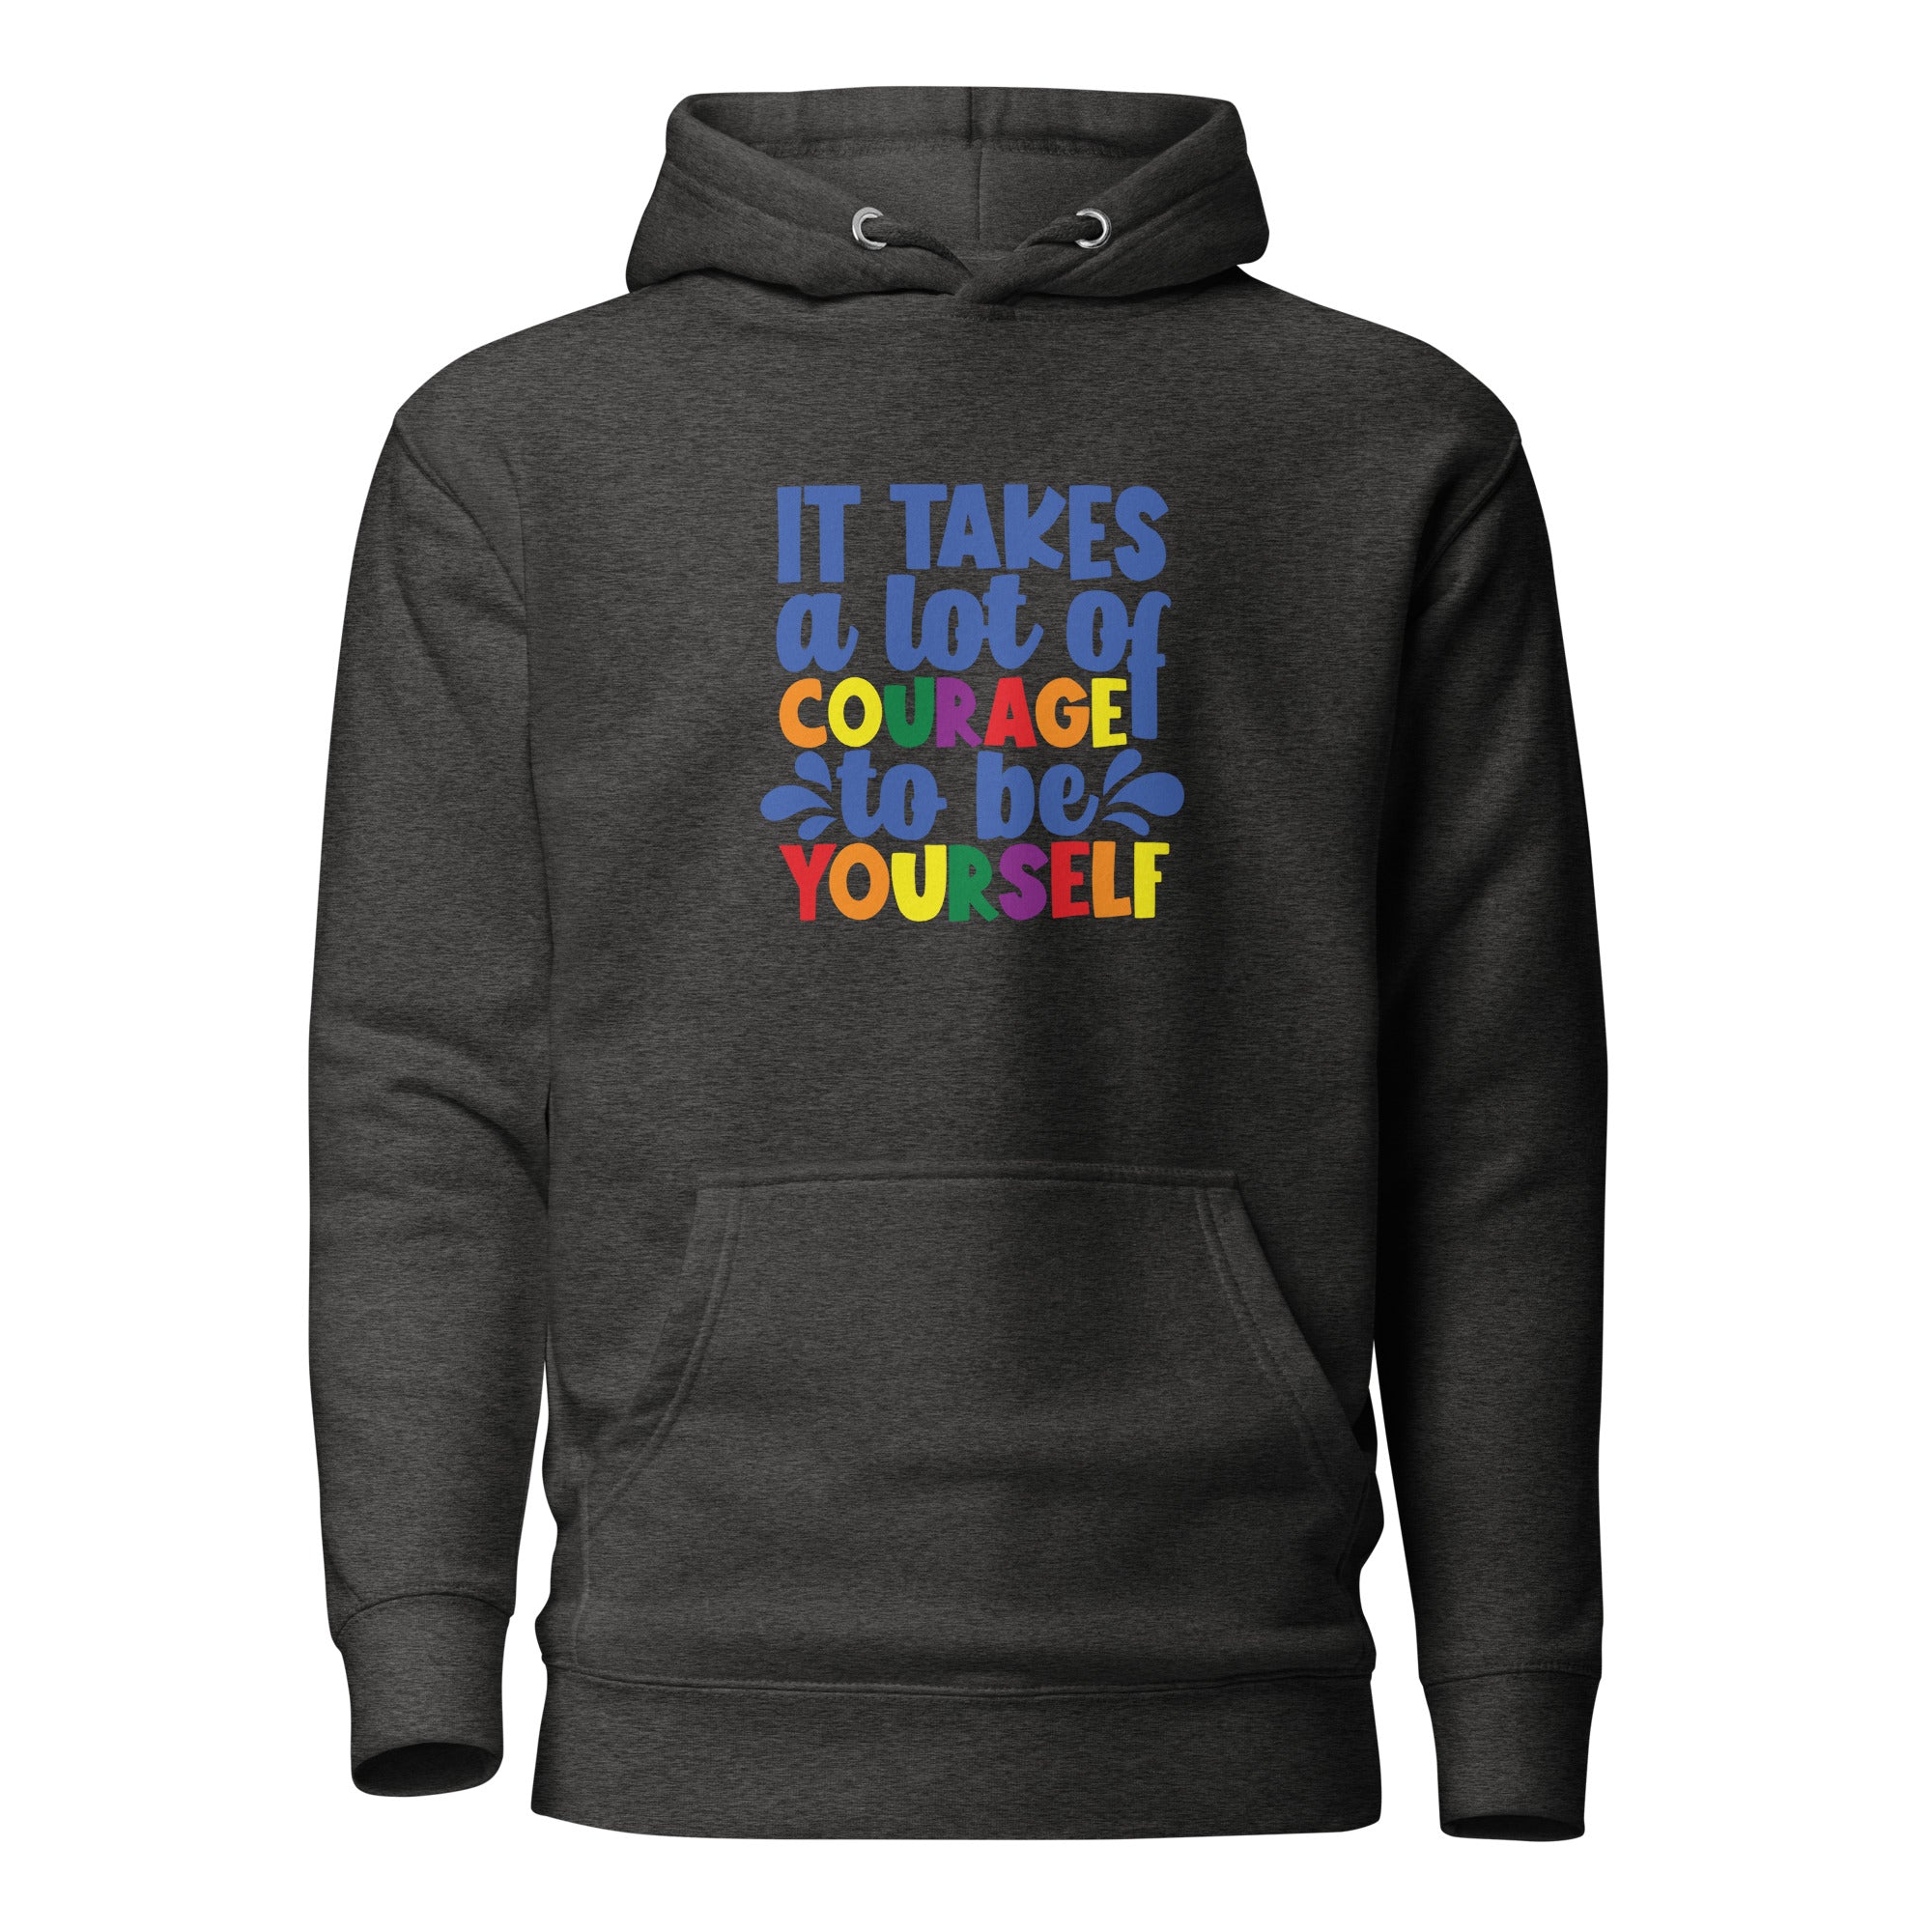 Unisex Hoodie- It takes a lot of courage to be yourself